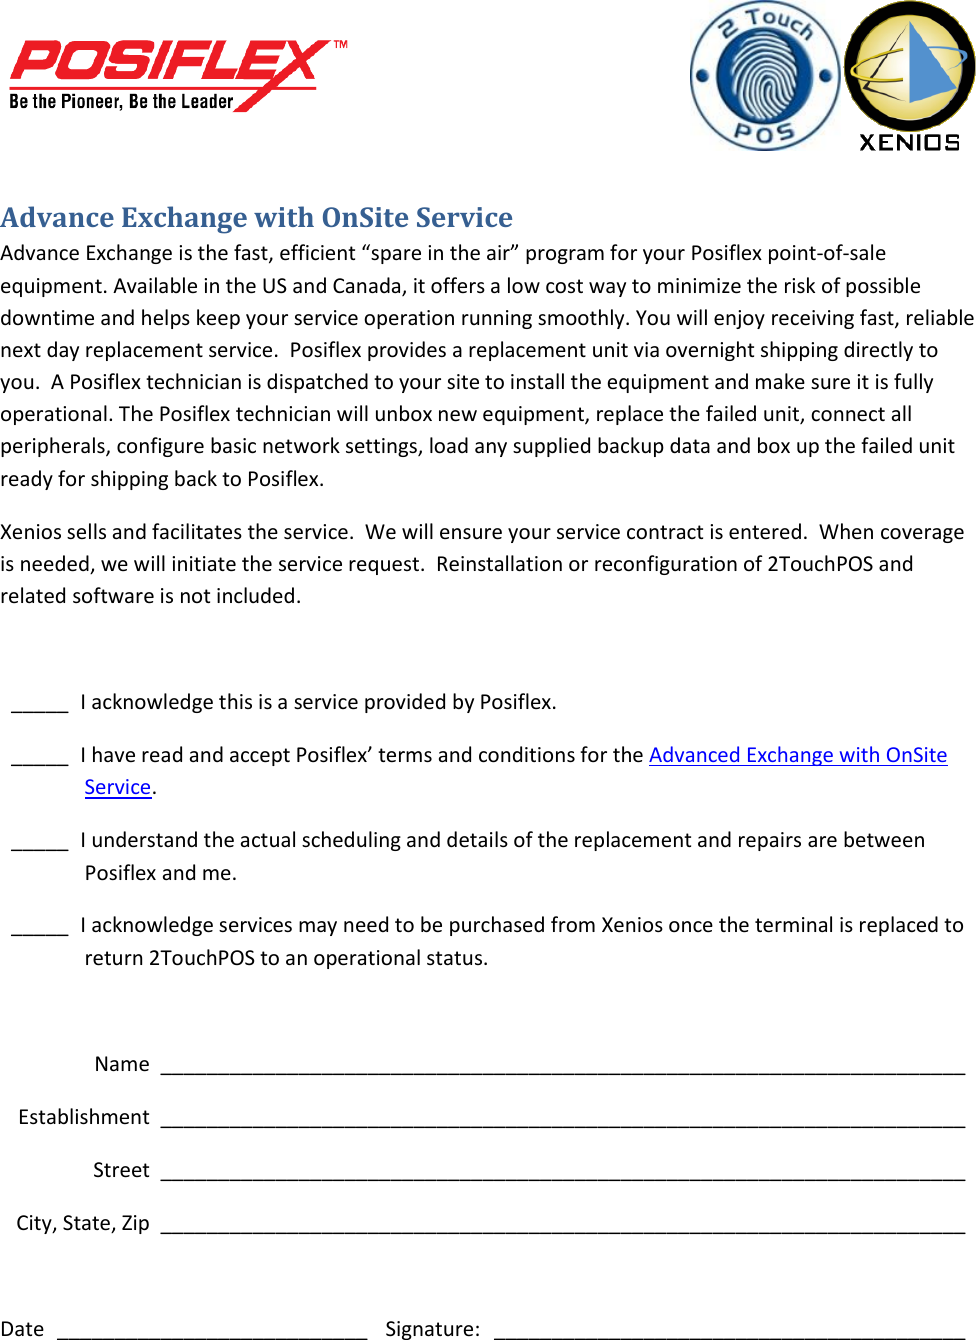 Page 1 of 1 - Advance Exchange With On Site Service Customer Acknowledgement Form